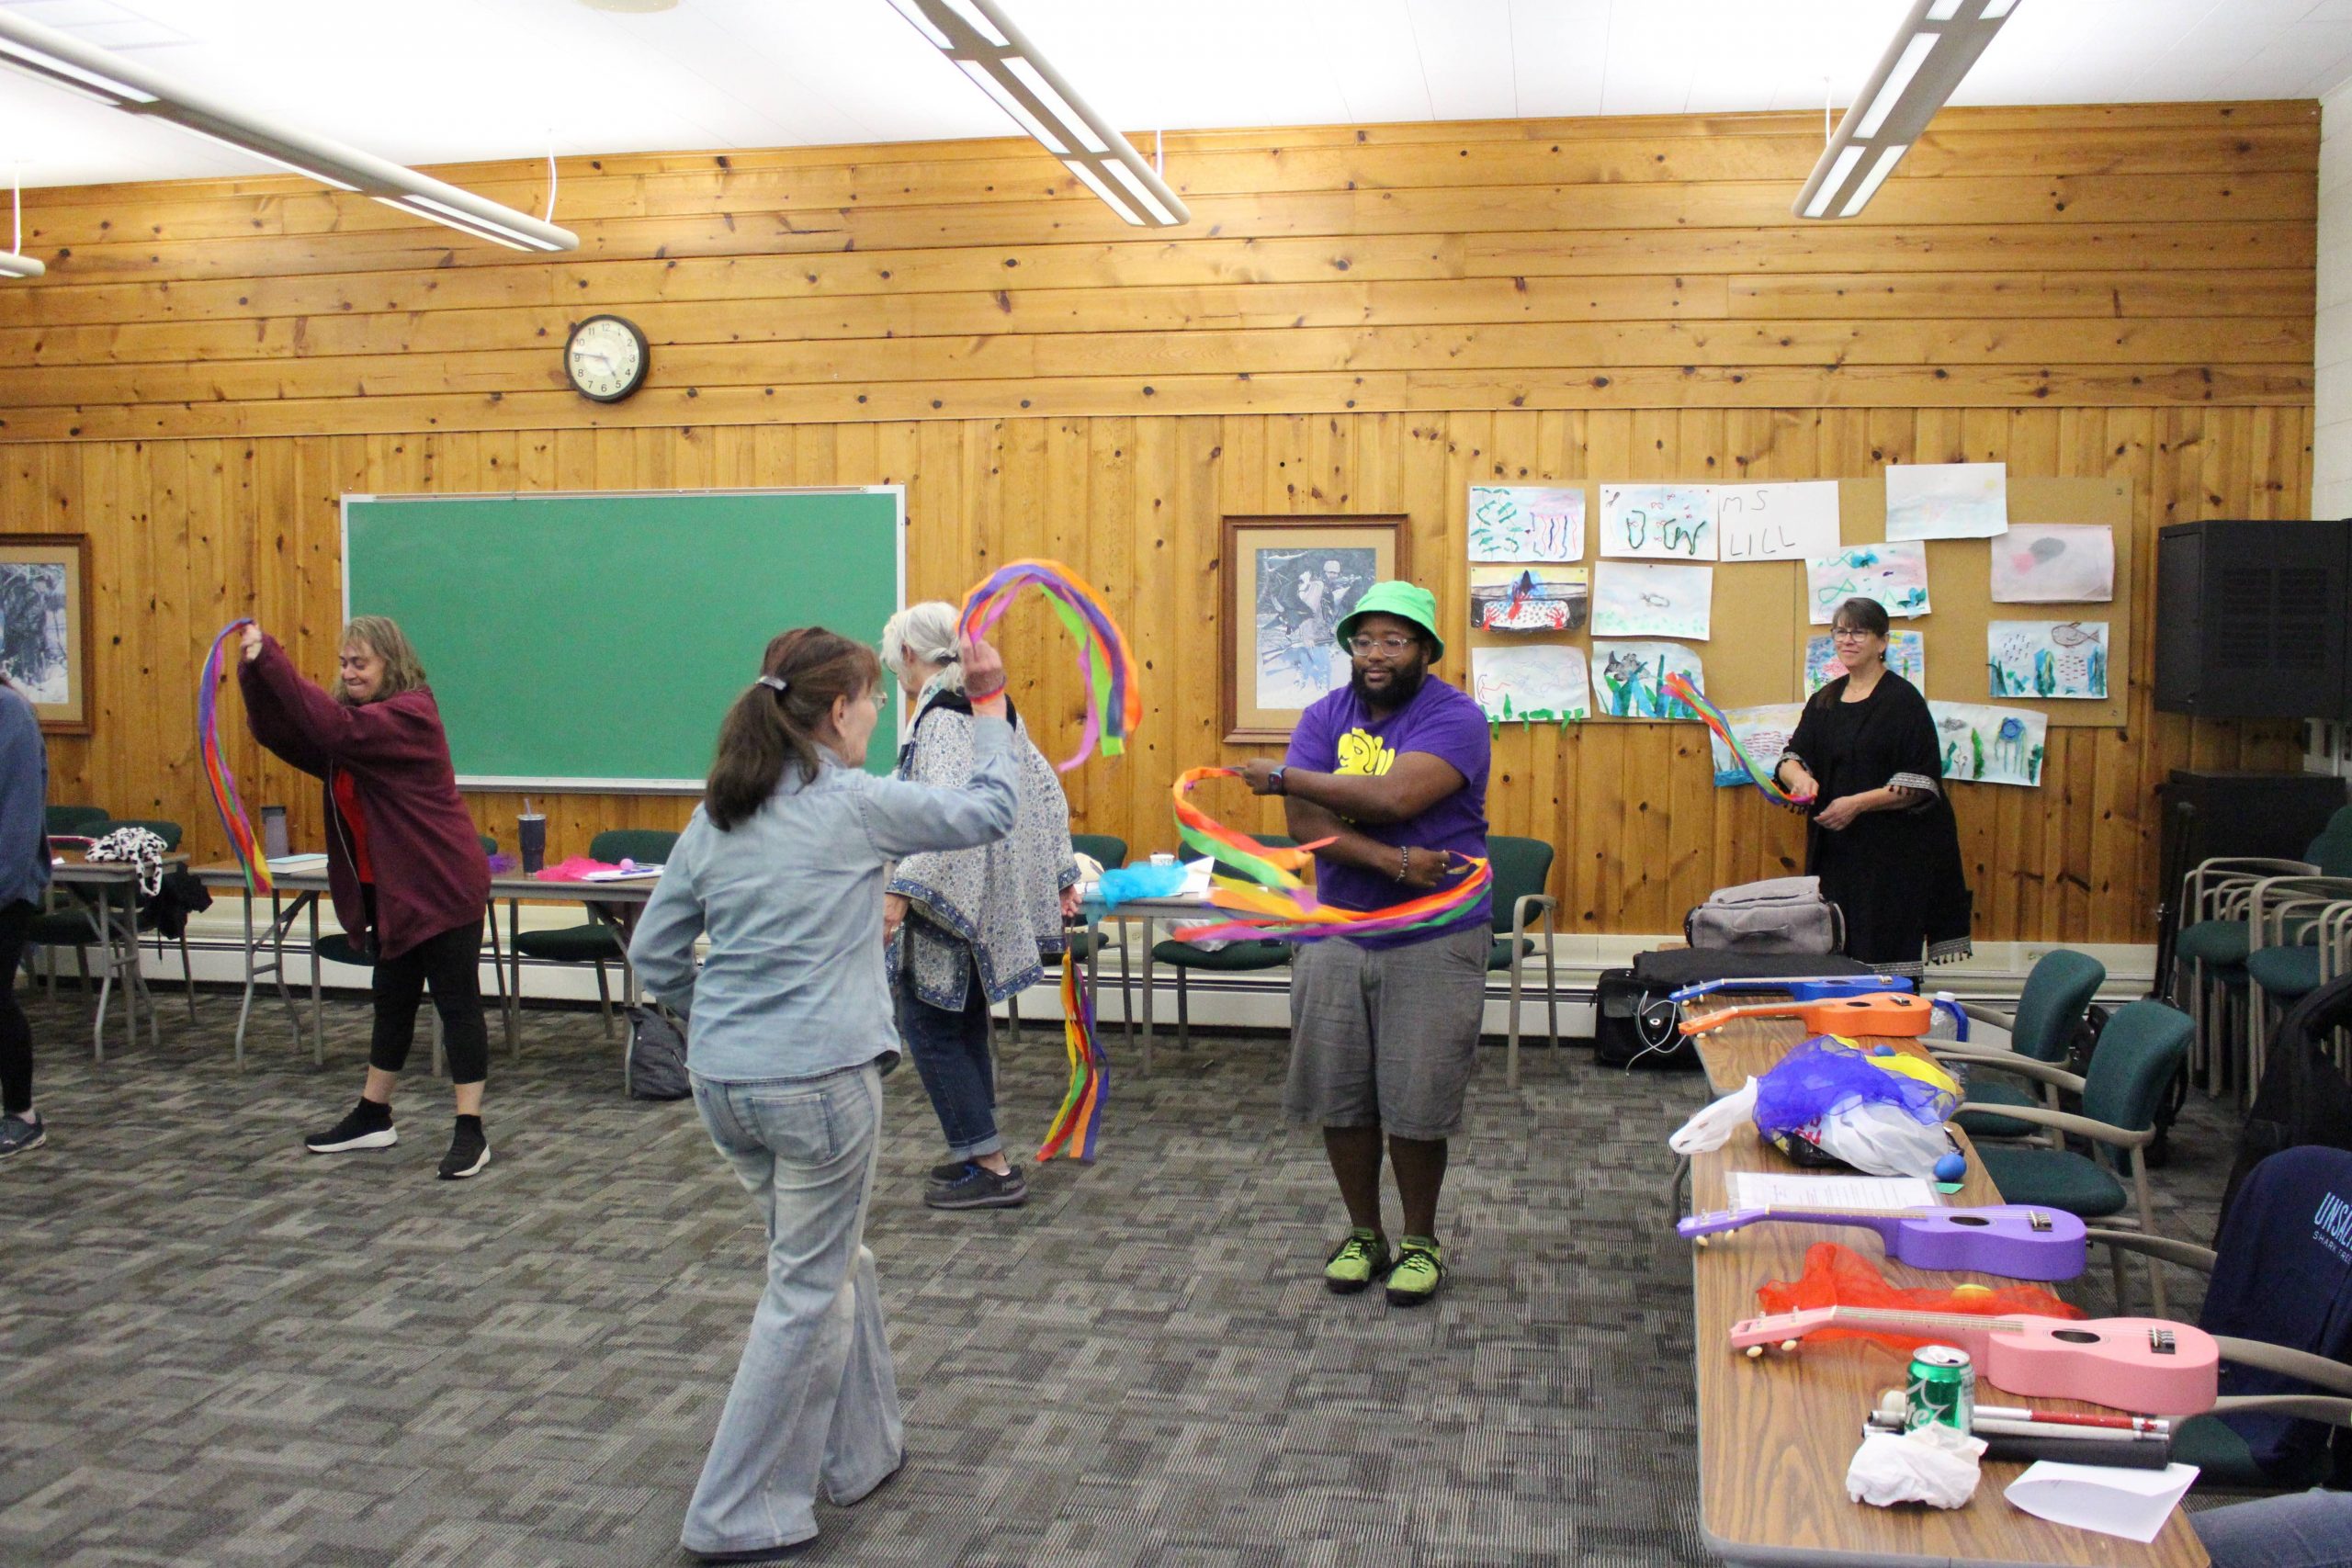 Teaching artists in a classroom using movement and colored scarfs to express themselves in a variety of ways